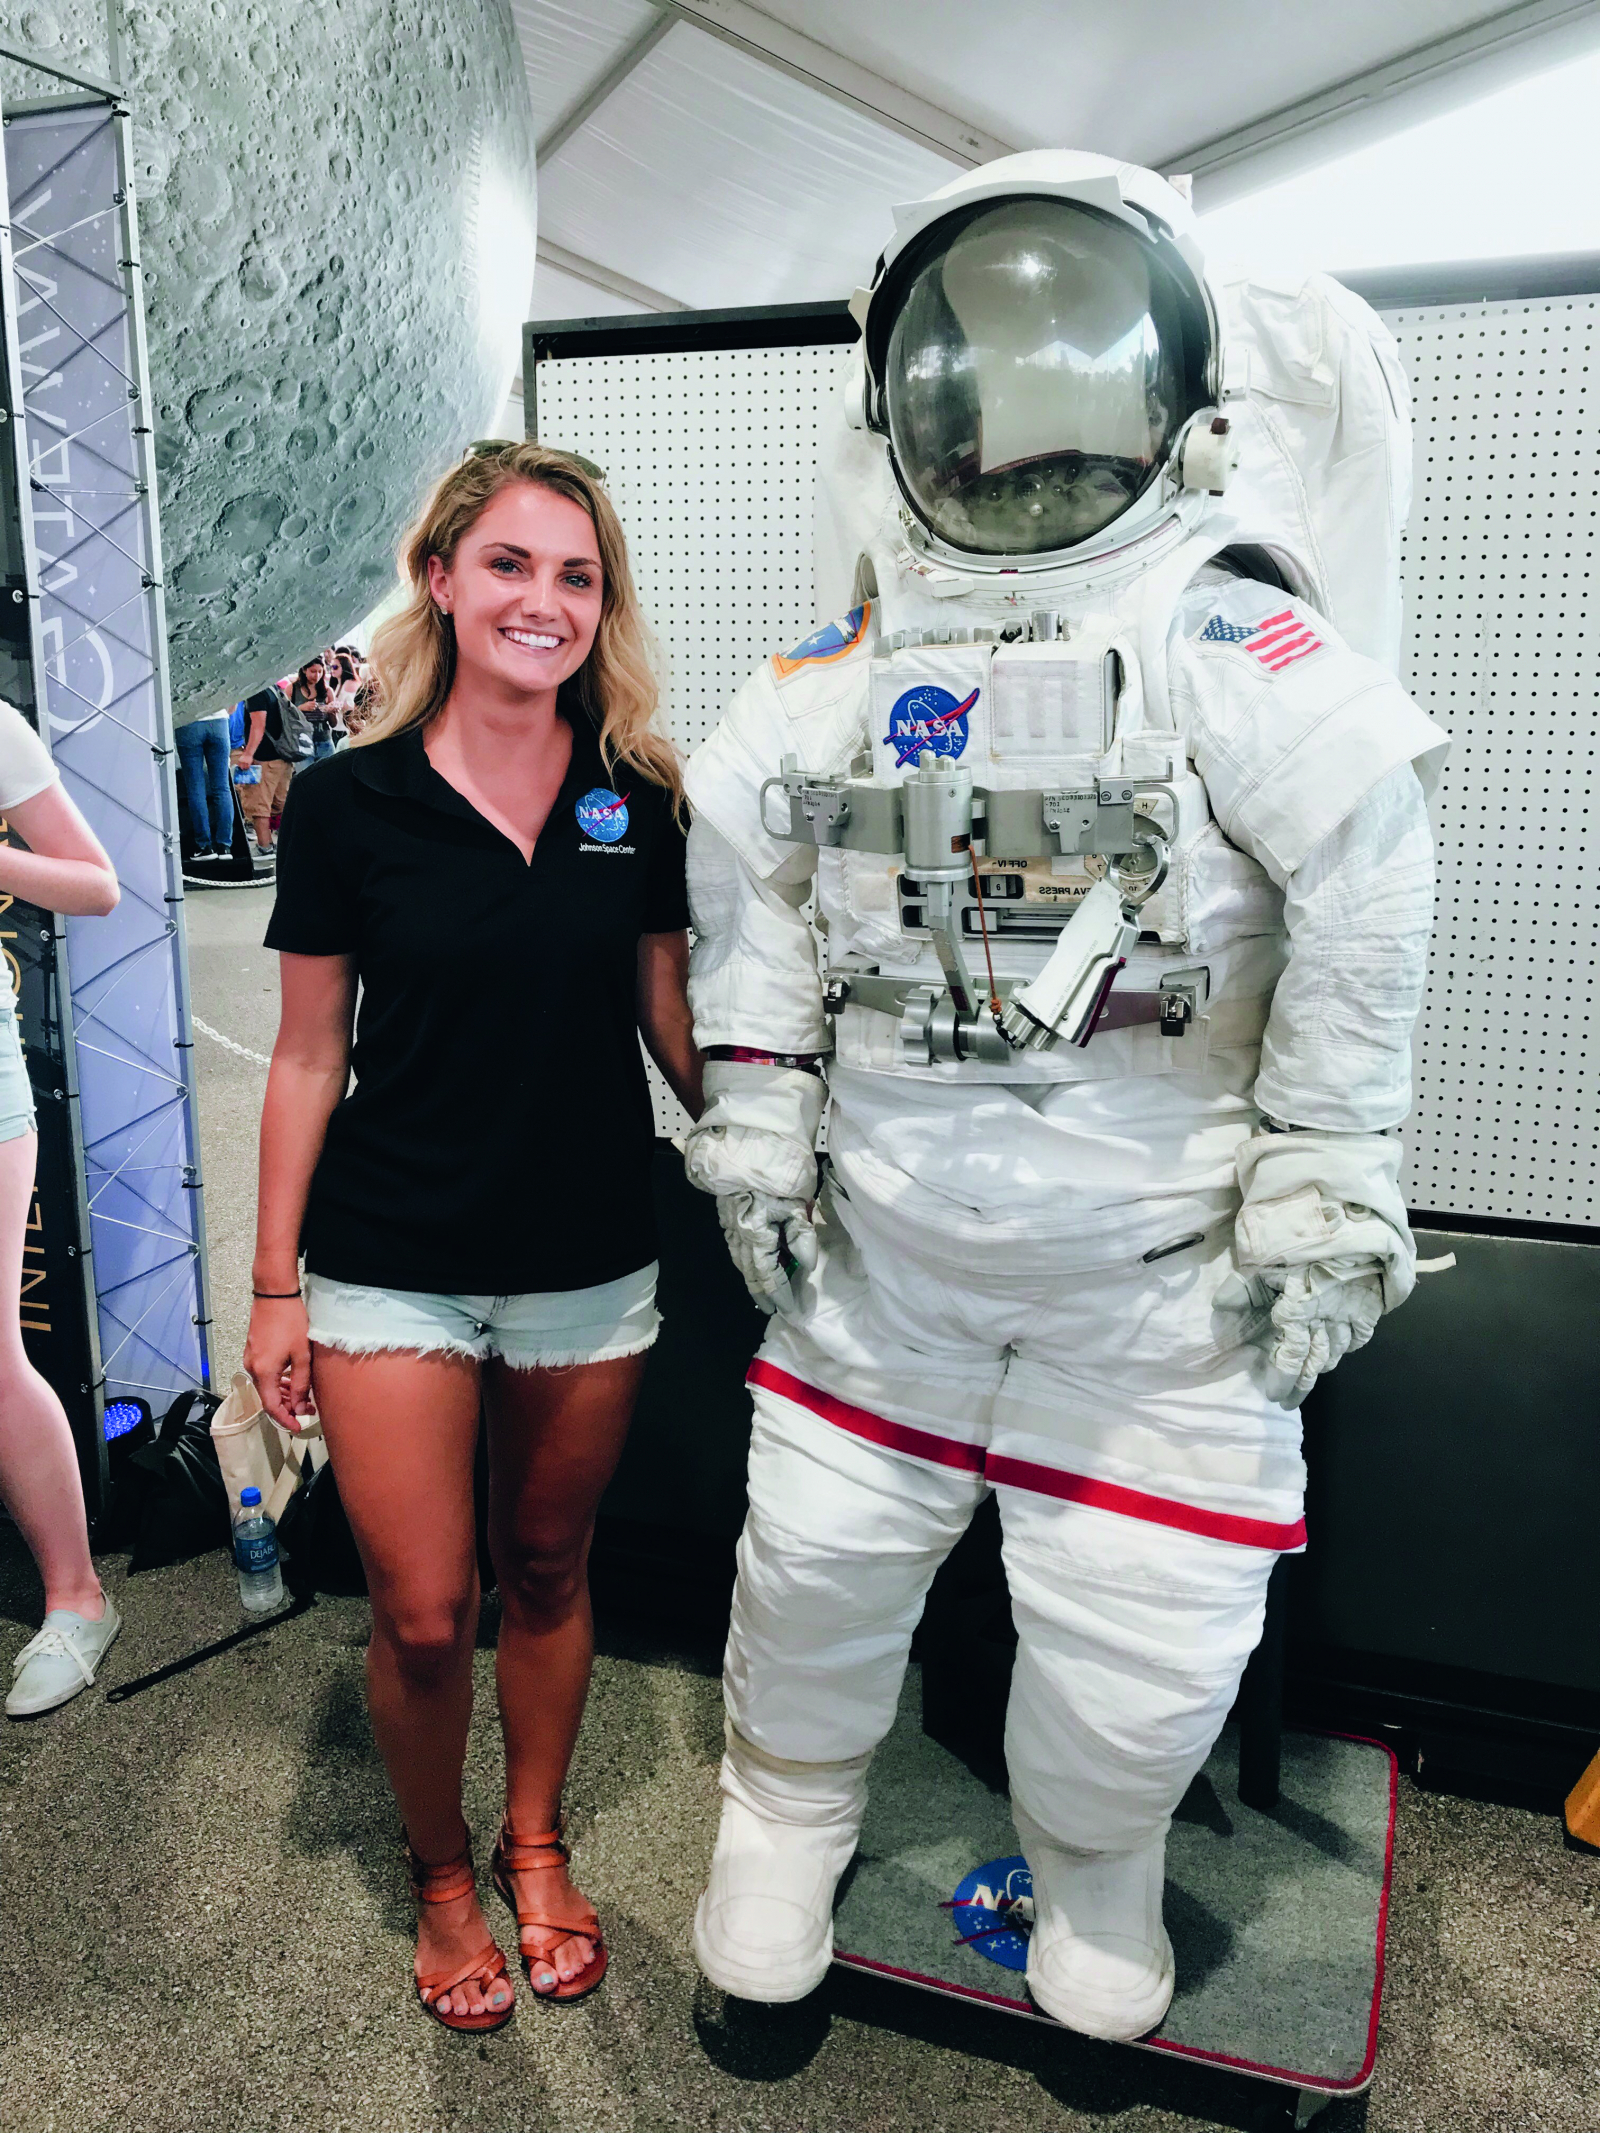 Young female student stands next to an empty astronaut suit in a space museum.